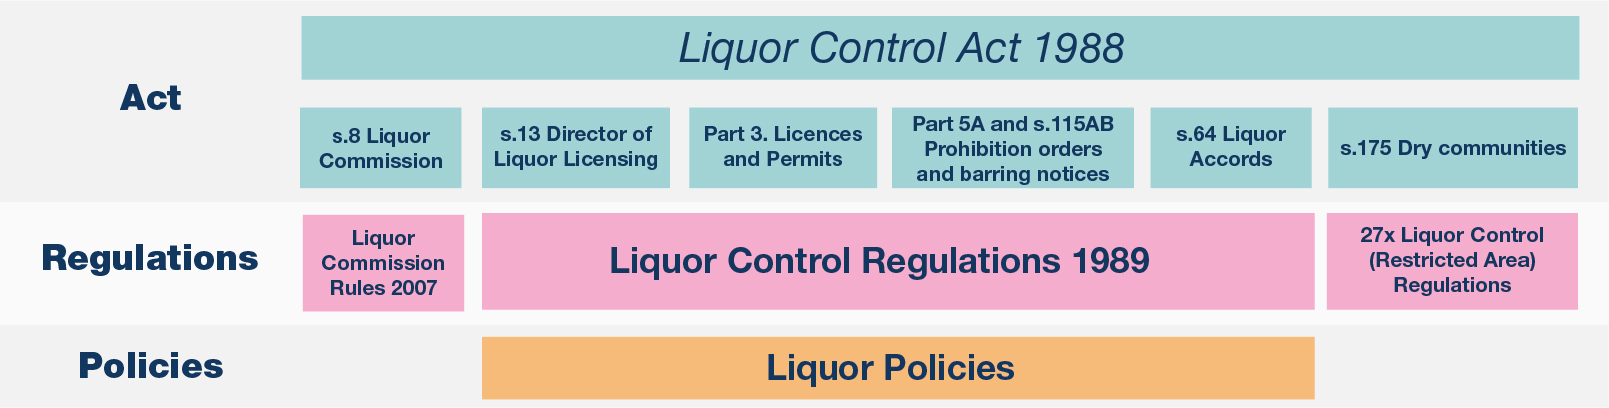 A diagram showing the Liquor Control Act 1988 and related regulations and policies.